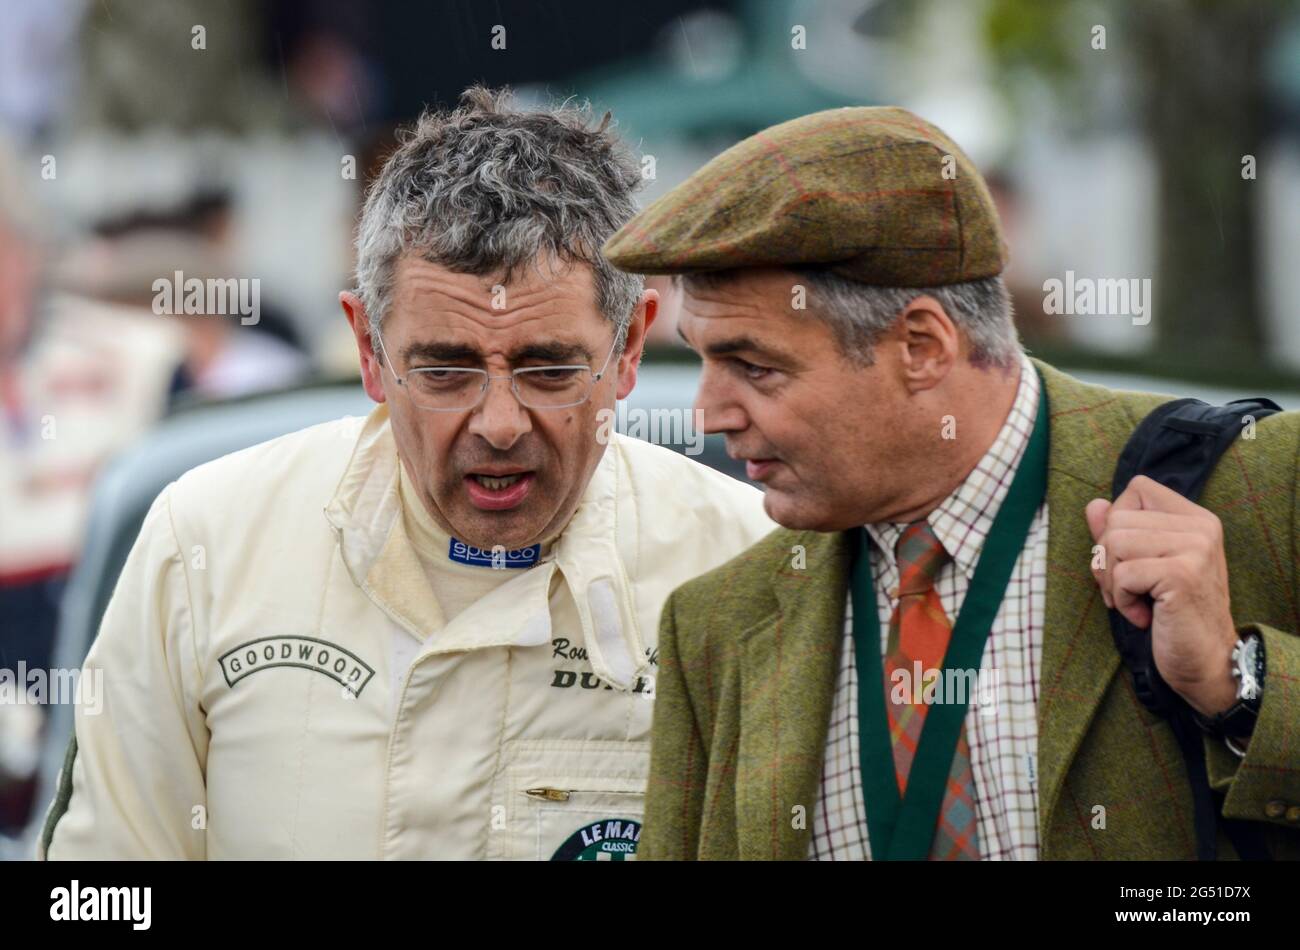 Comedian Actor Rowan Atkinson Actor High Resolution Stock Photography and  Images - Alamy